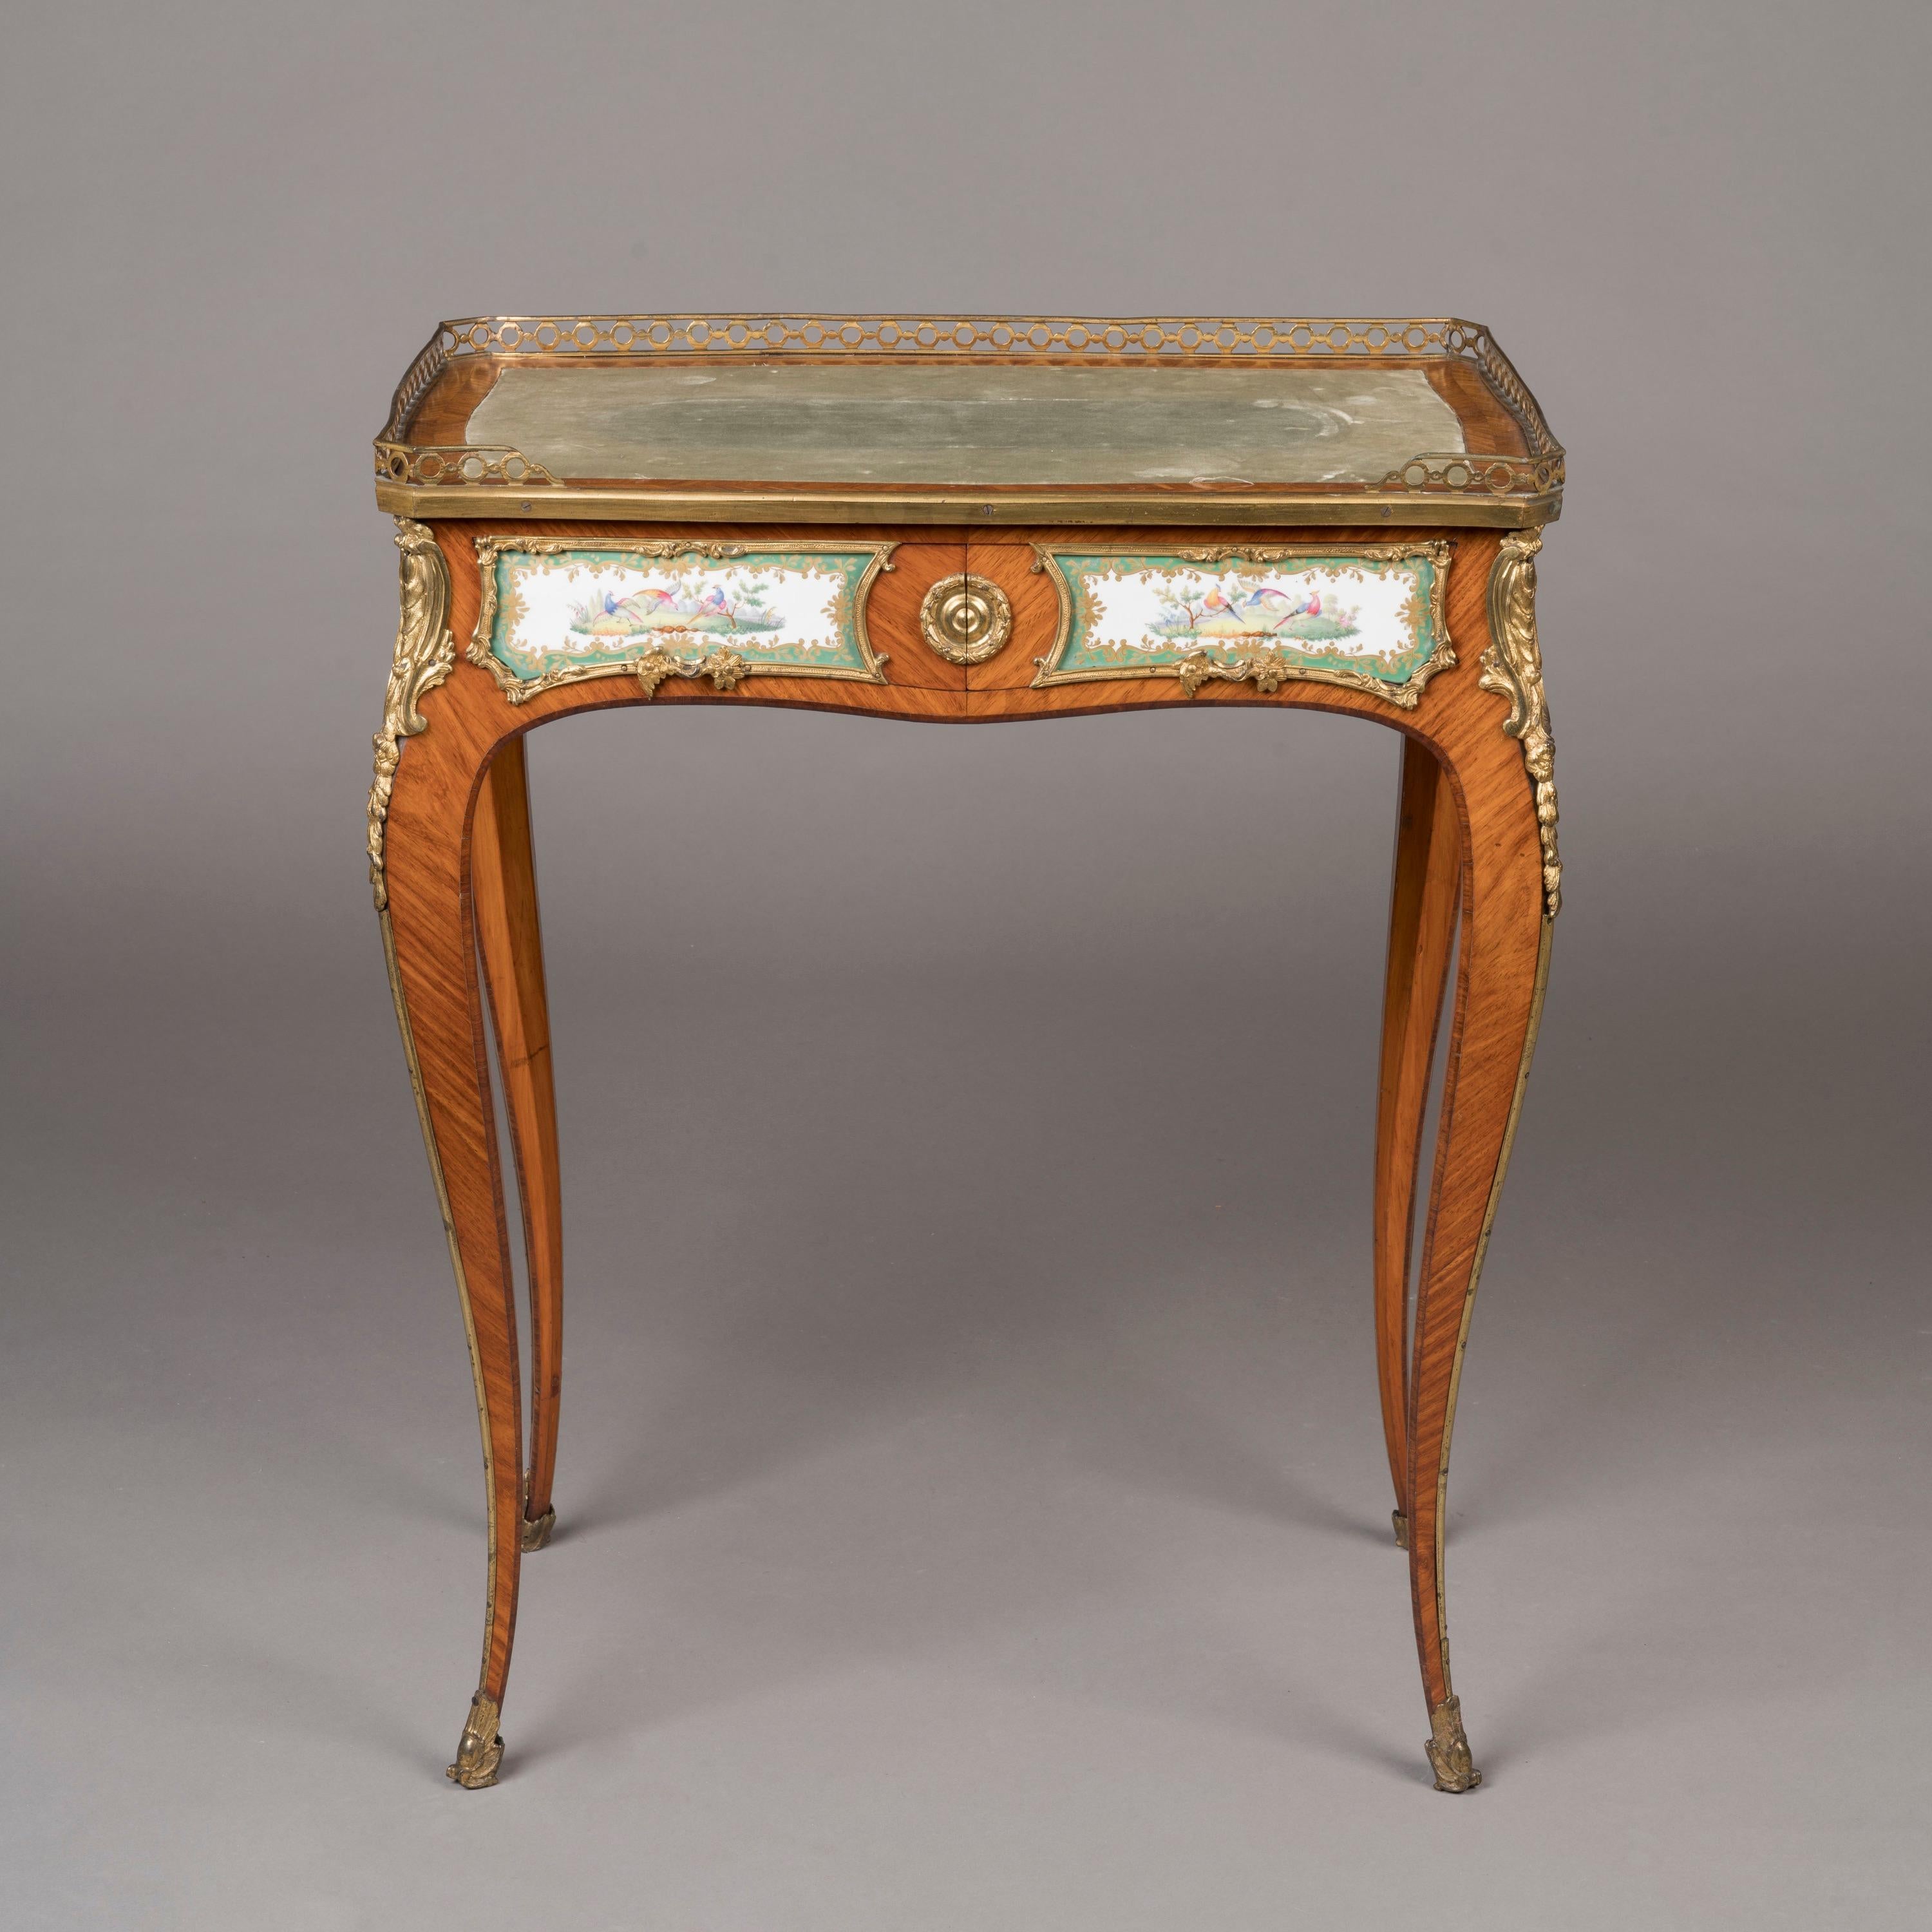 19th Century French Porcelain-Mounted Occasional Table in the Louis XV/XVI Style For Sale 1